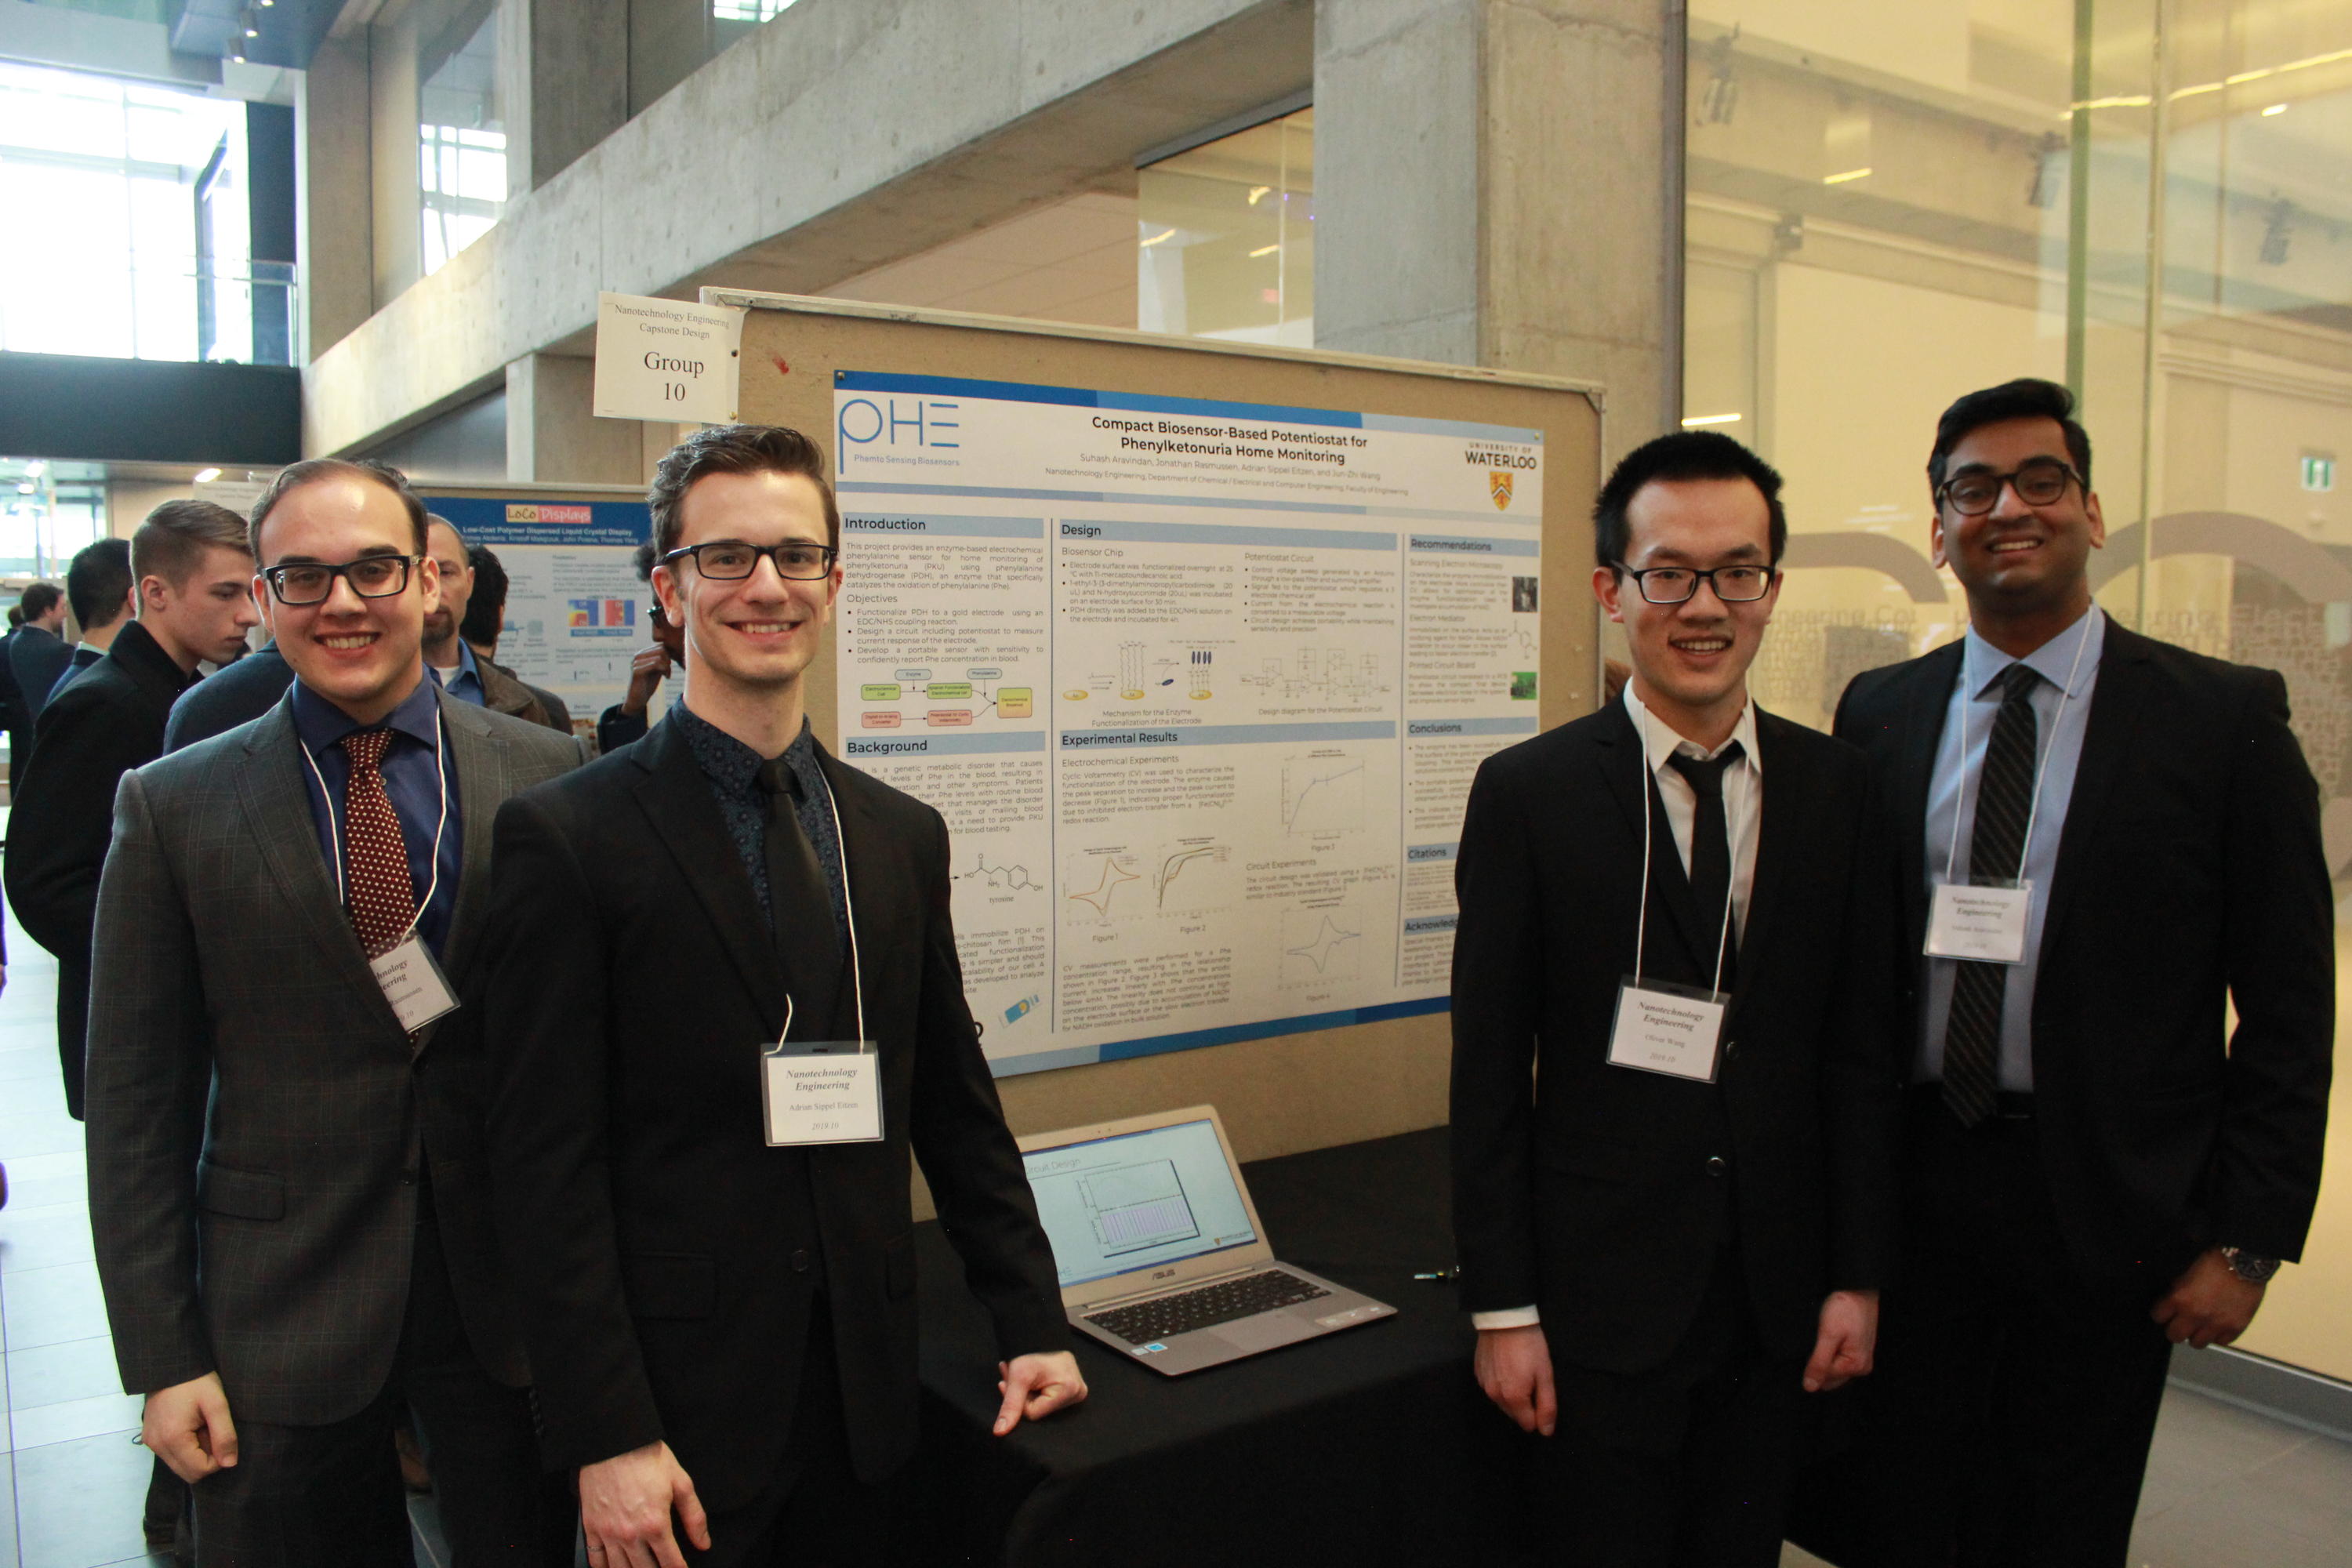 Team 10 students with their project poster at the 2019 Capstone Design Symposium.